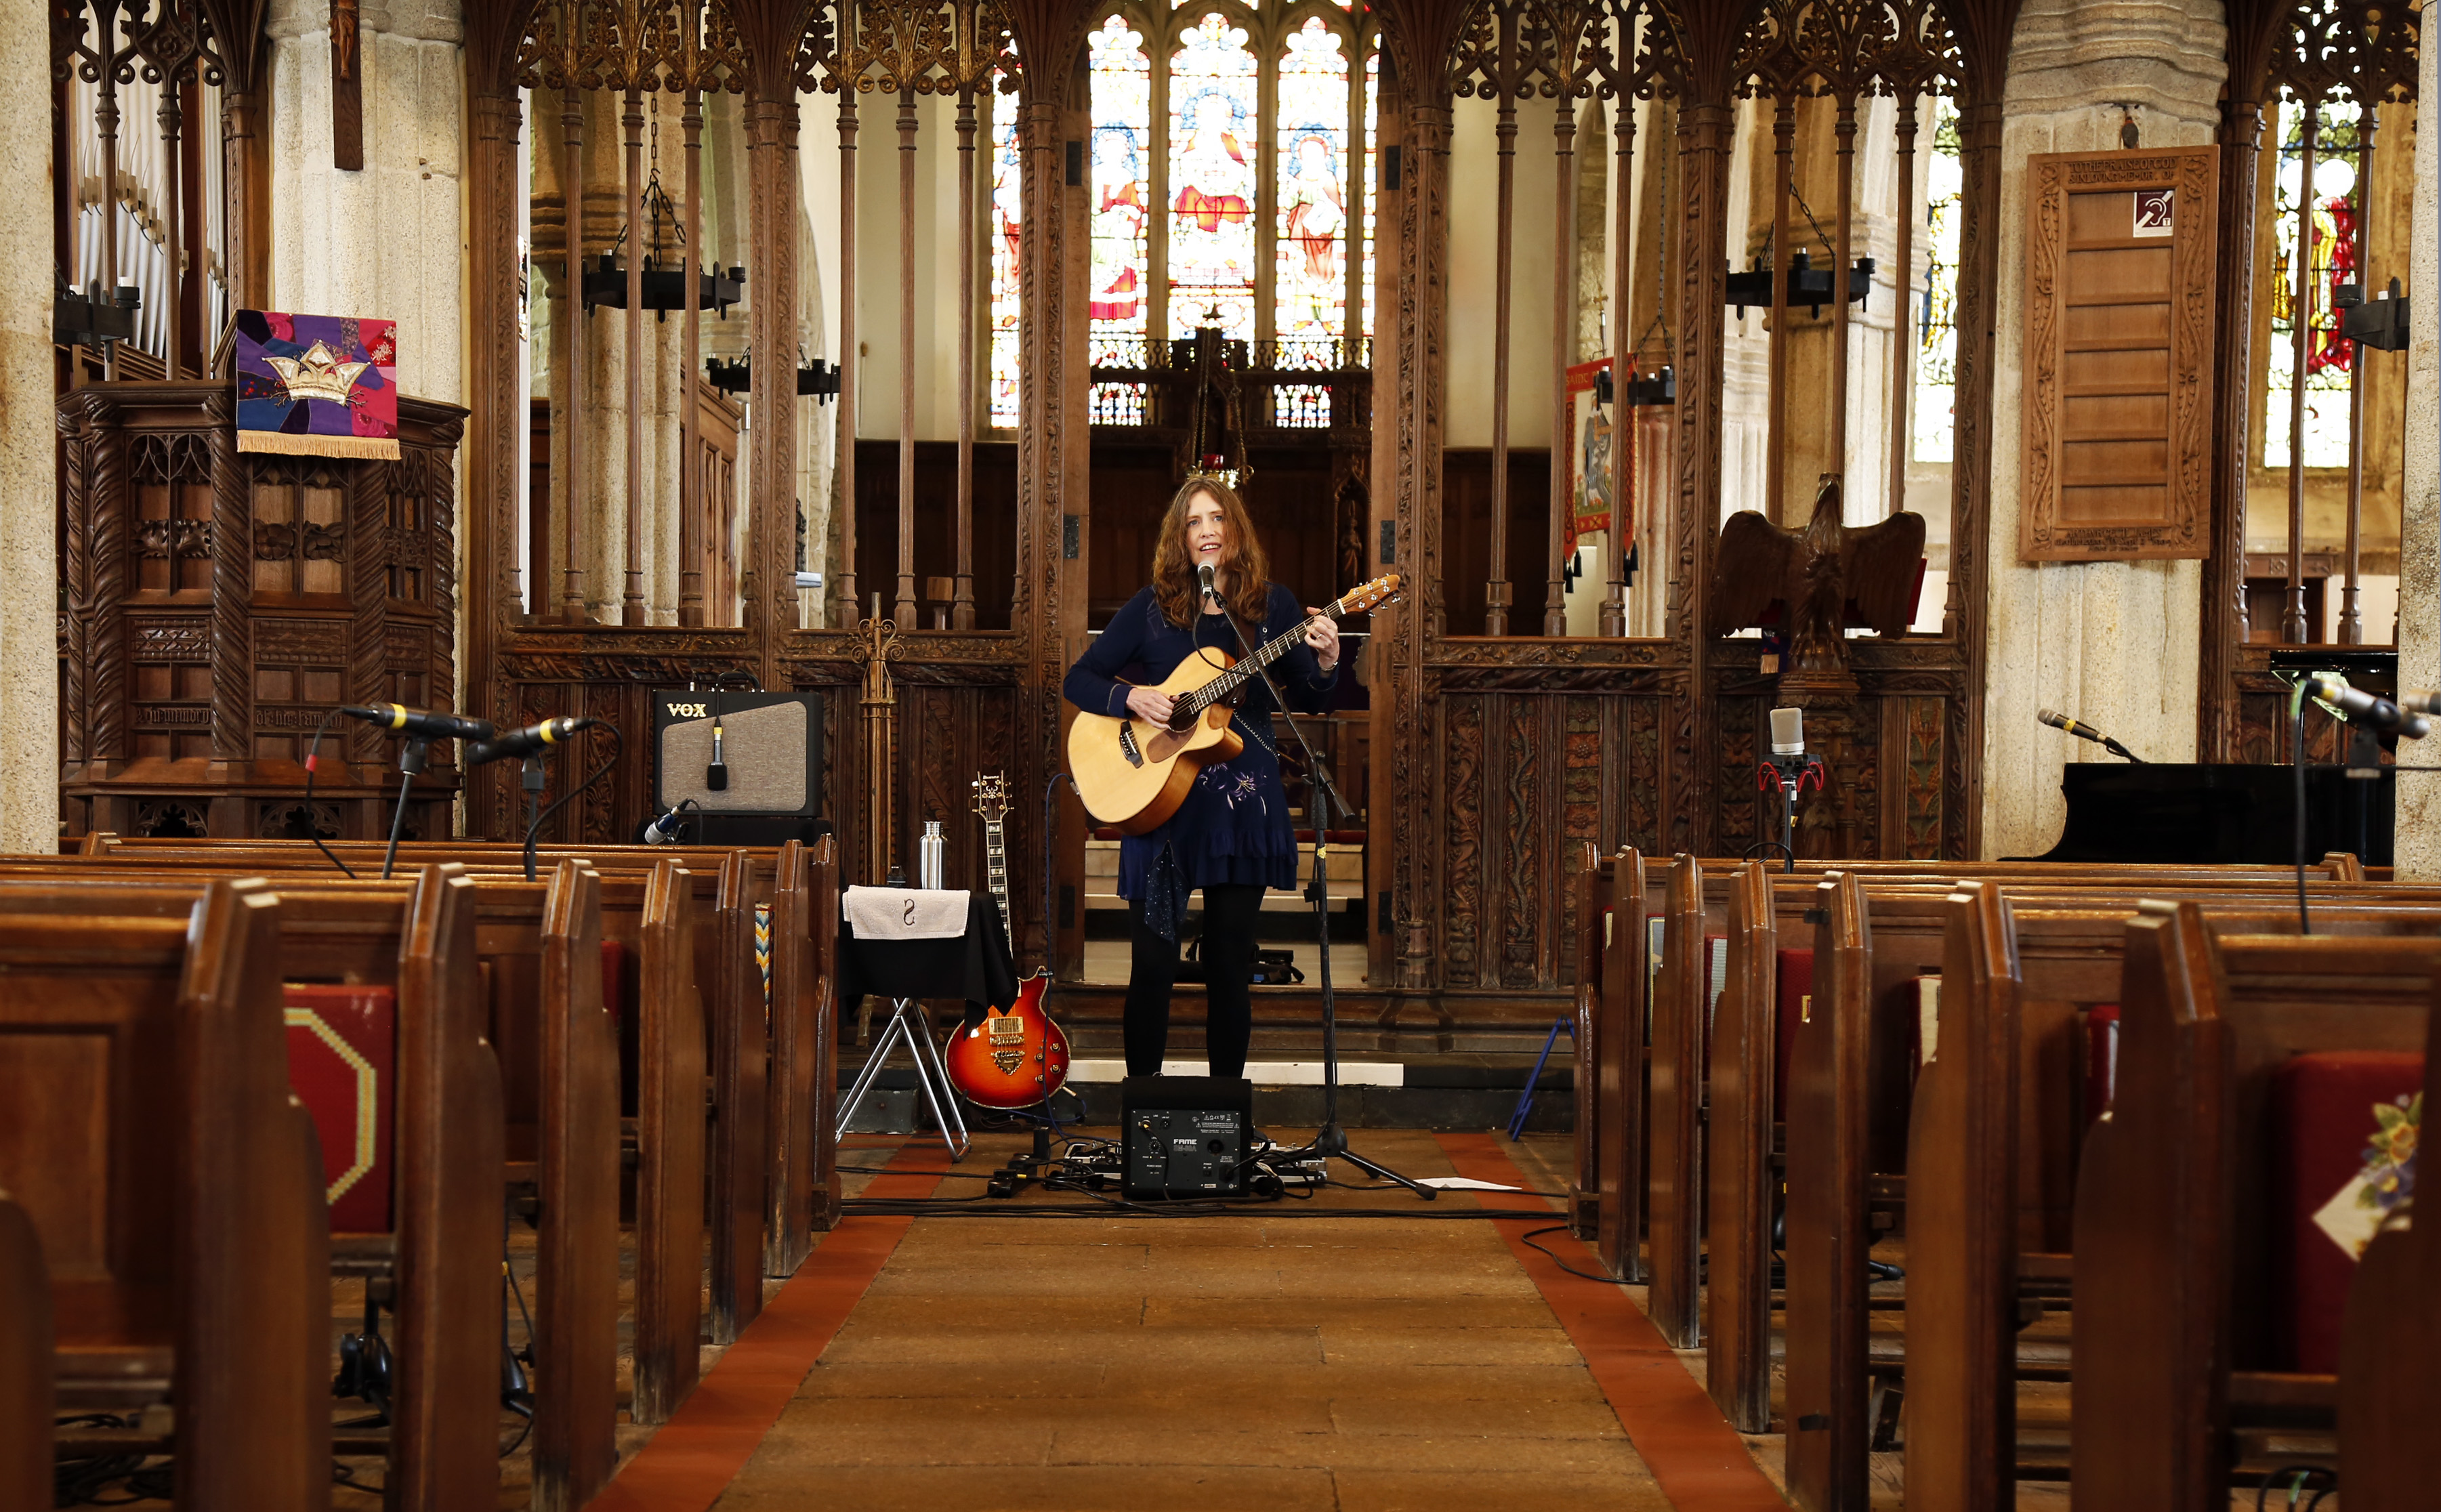 Sarah McQuaid’s ‘St Buryan Sessions’ Captures Live Play in a Medieval Church